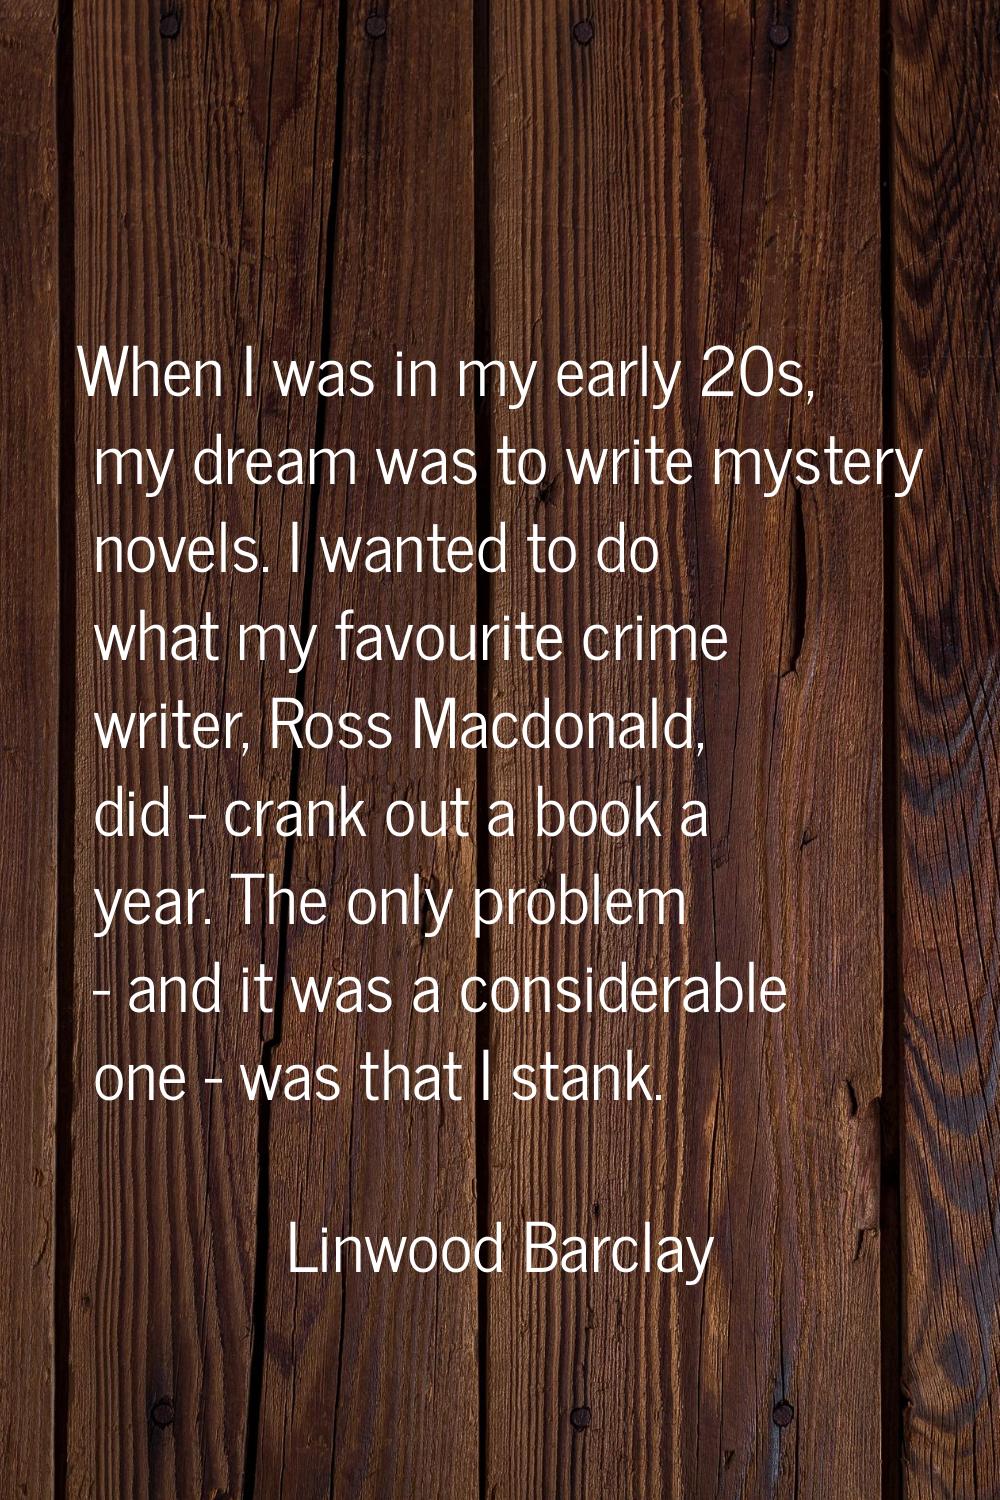 When I was in my early 20s, my dream was to write mystery novels. I wanted to do what my favourite 